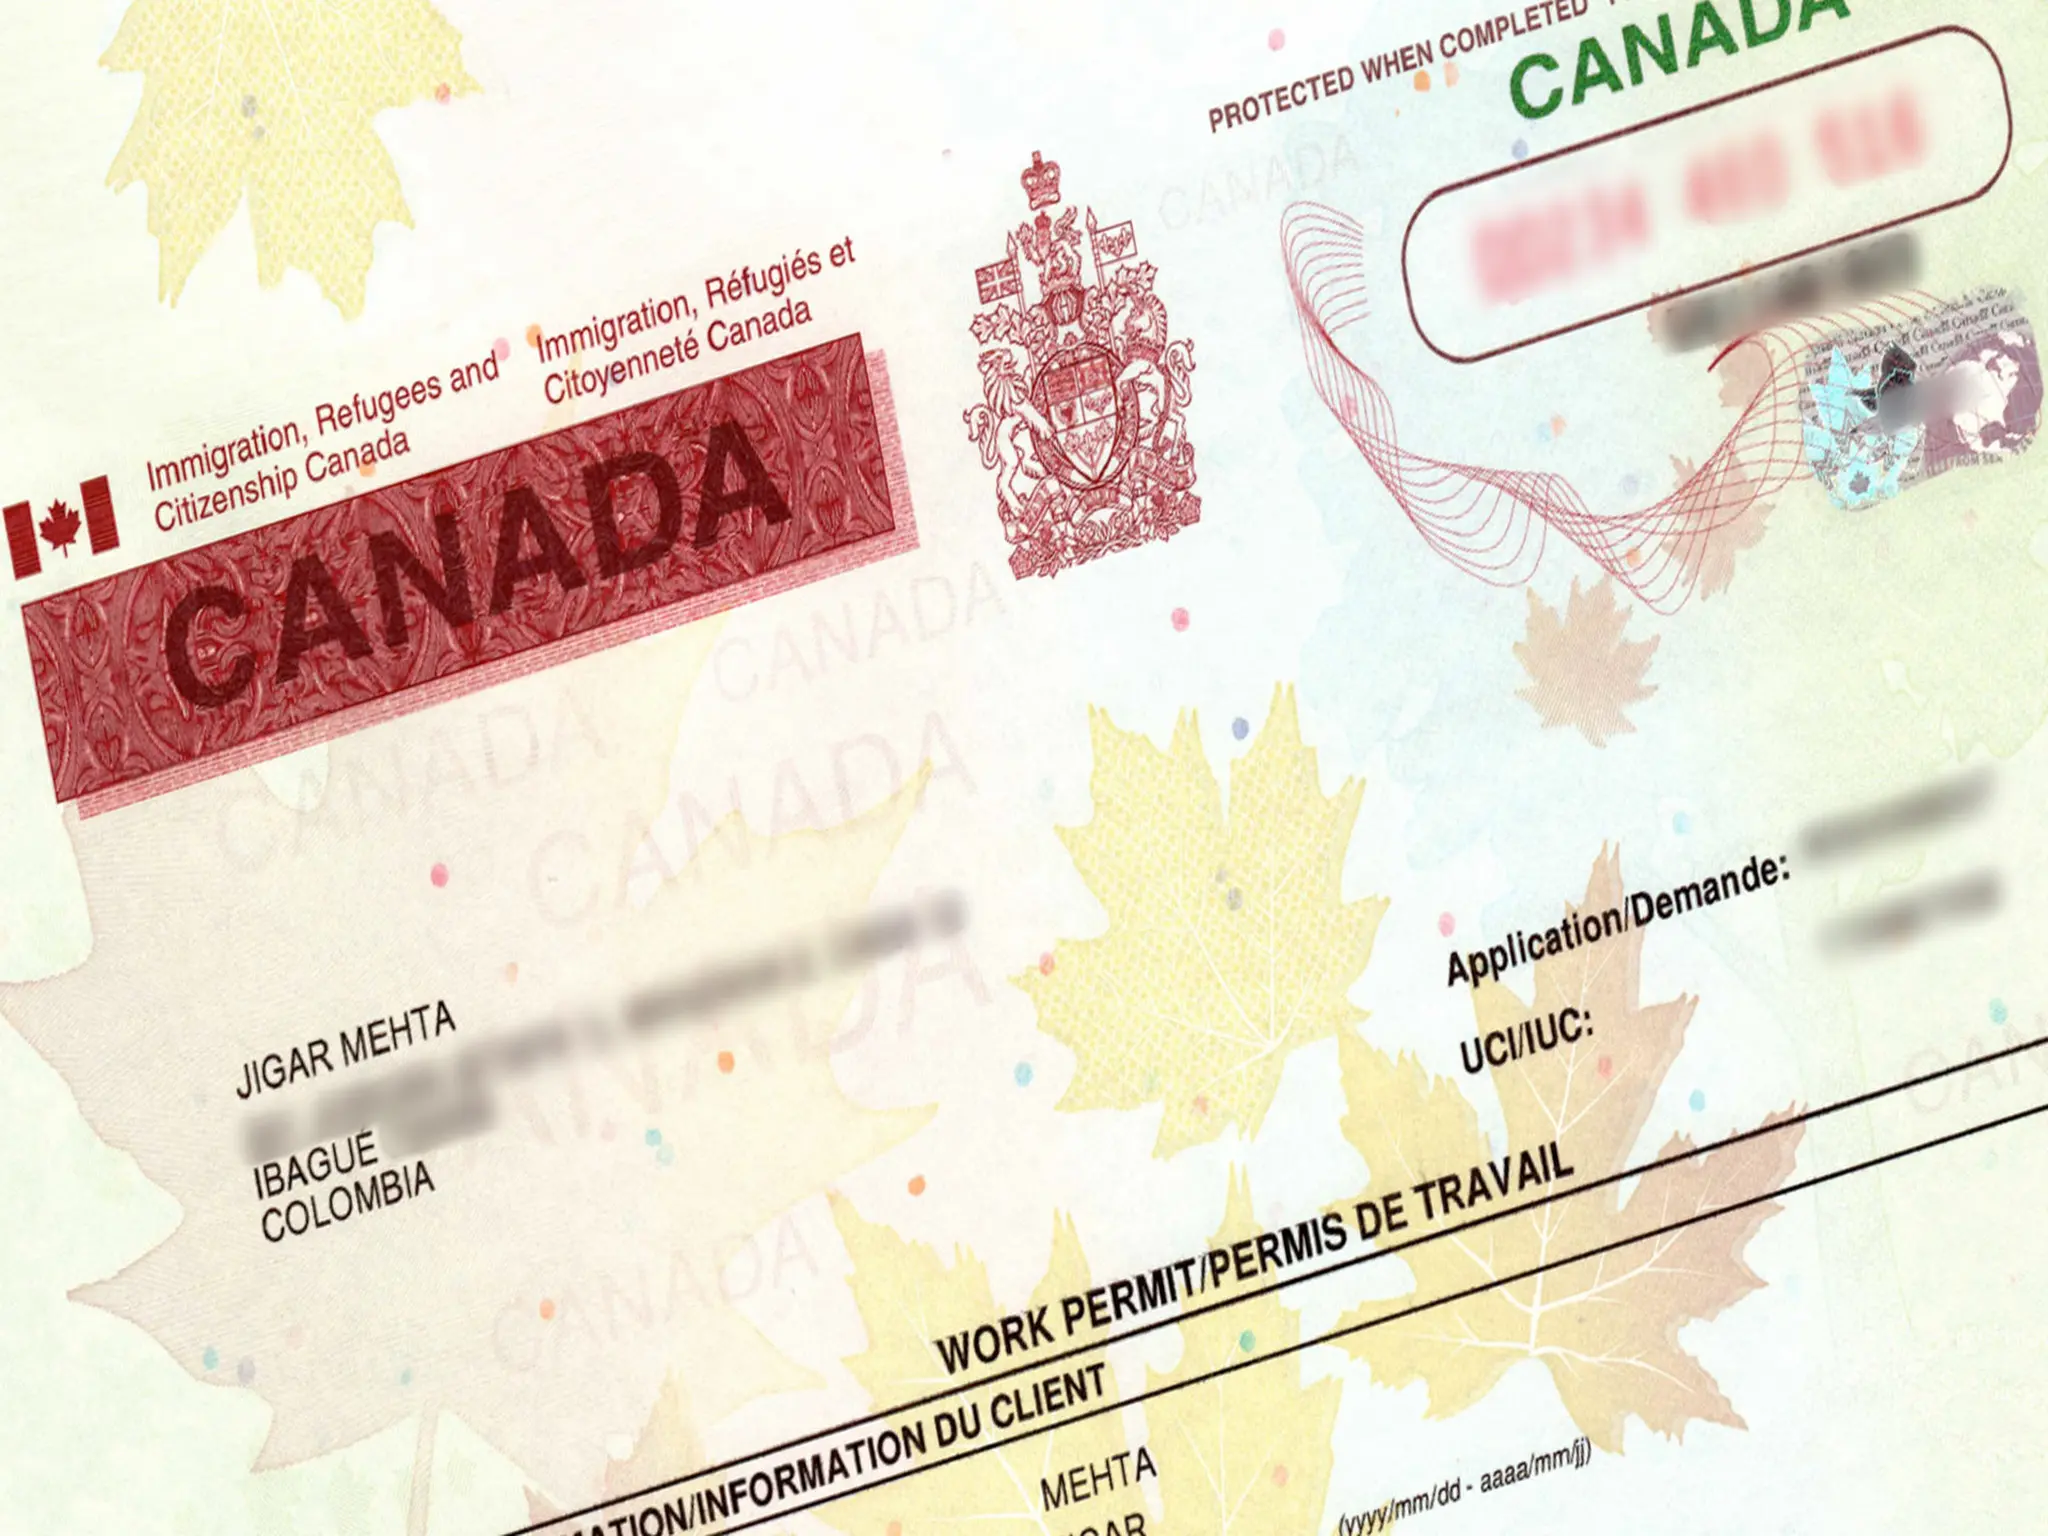 Canada sets the requirements for foreign citizens to apply for a Canadian work permit